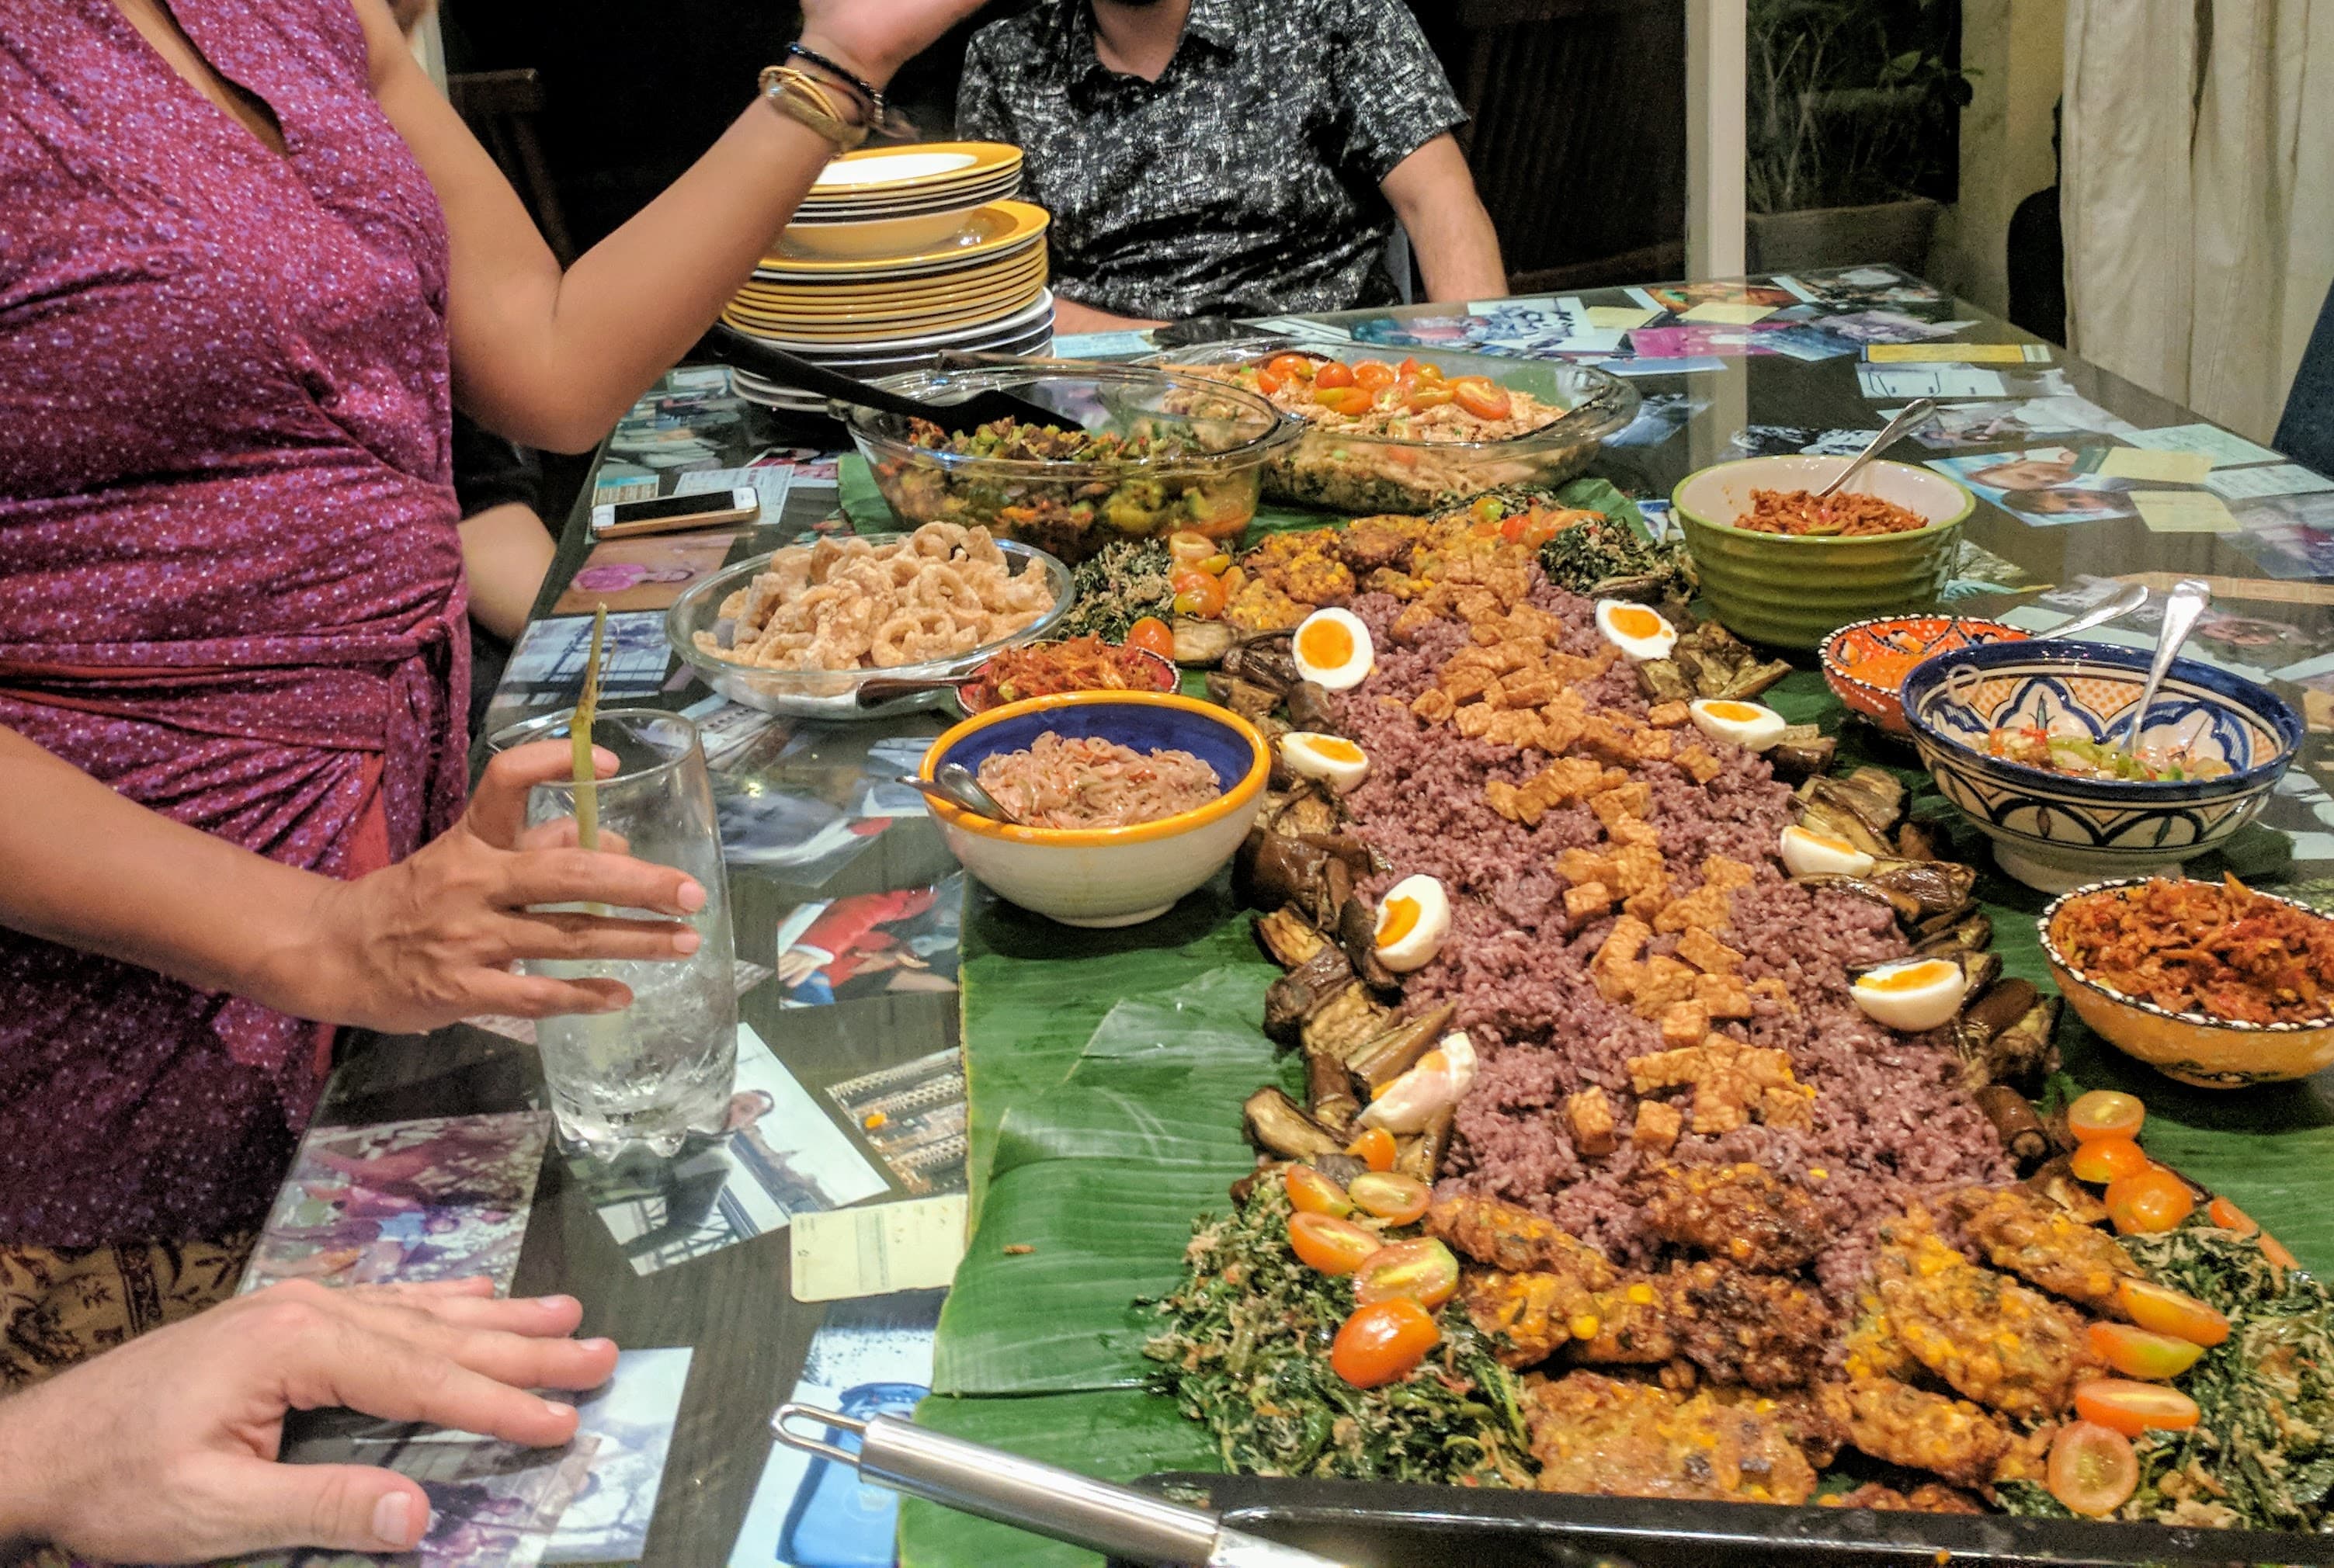 A photo of a person hovering over a large banana leaf full of Indonesian food with many colors